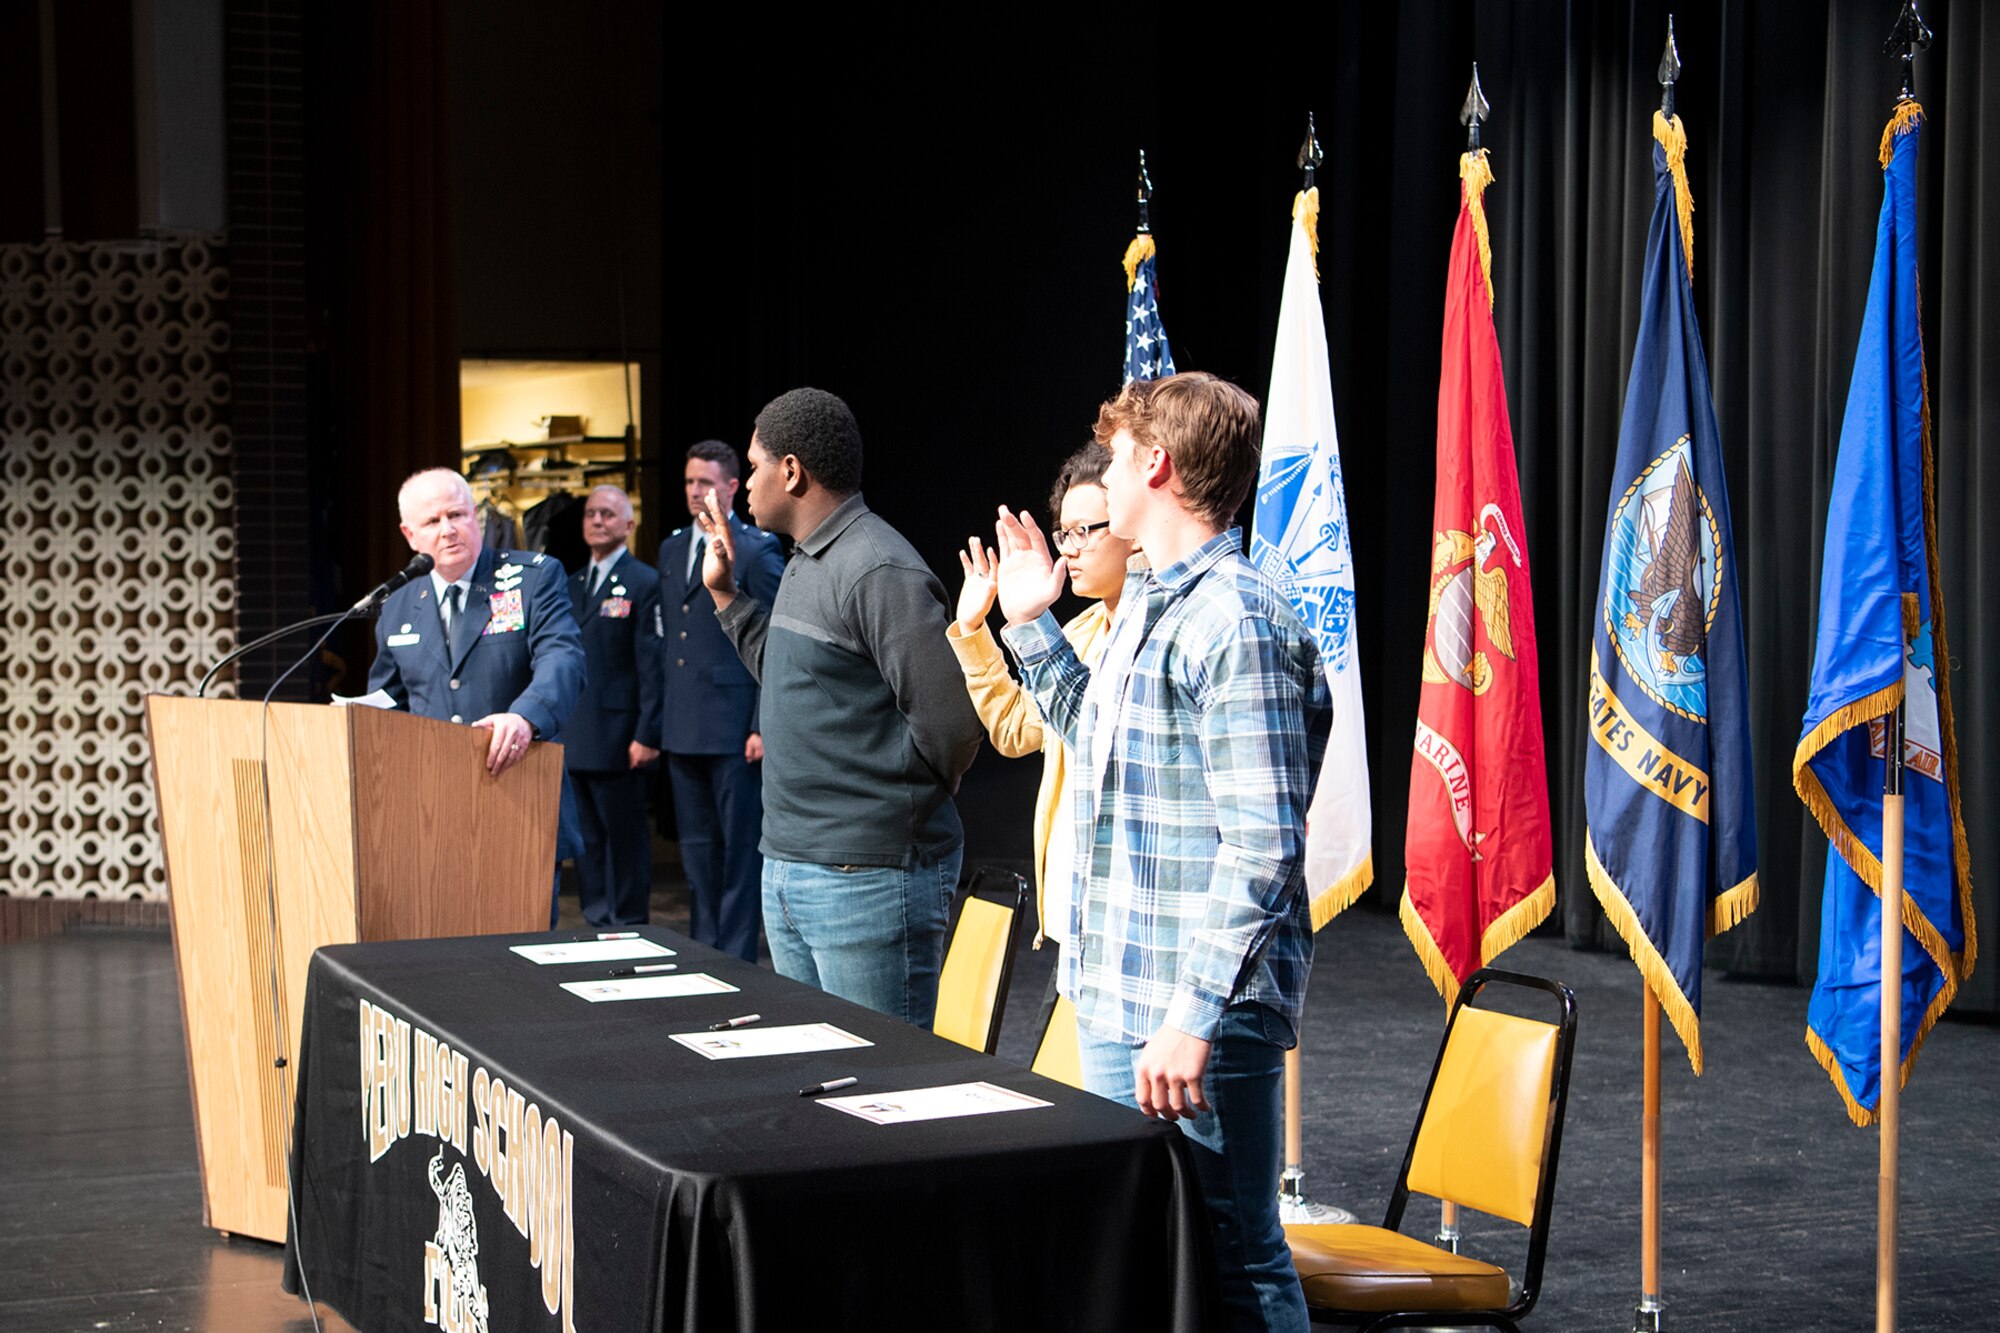 Col. Thom Pemberton, 434th Air Refueling Wing commander, administers the oath of enlistment to military signees during a Peru High School military signing day event May 1. Schools from both Peru and Kokomo held events to recognize the next generation of citizen warriors. (U.S. Air Force photo/TSgt. Jami Lancette)